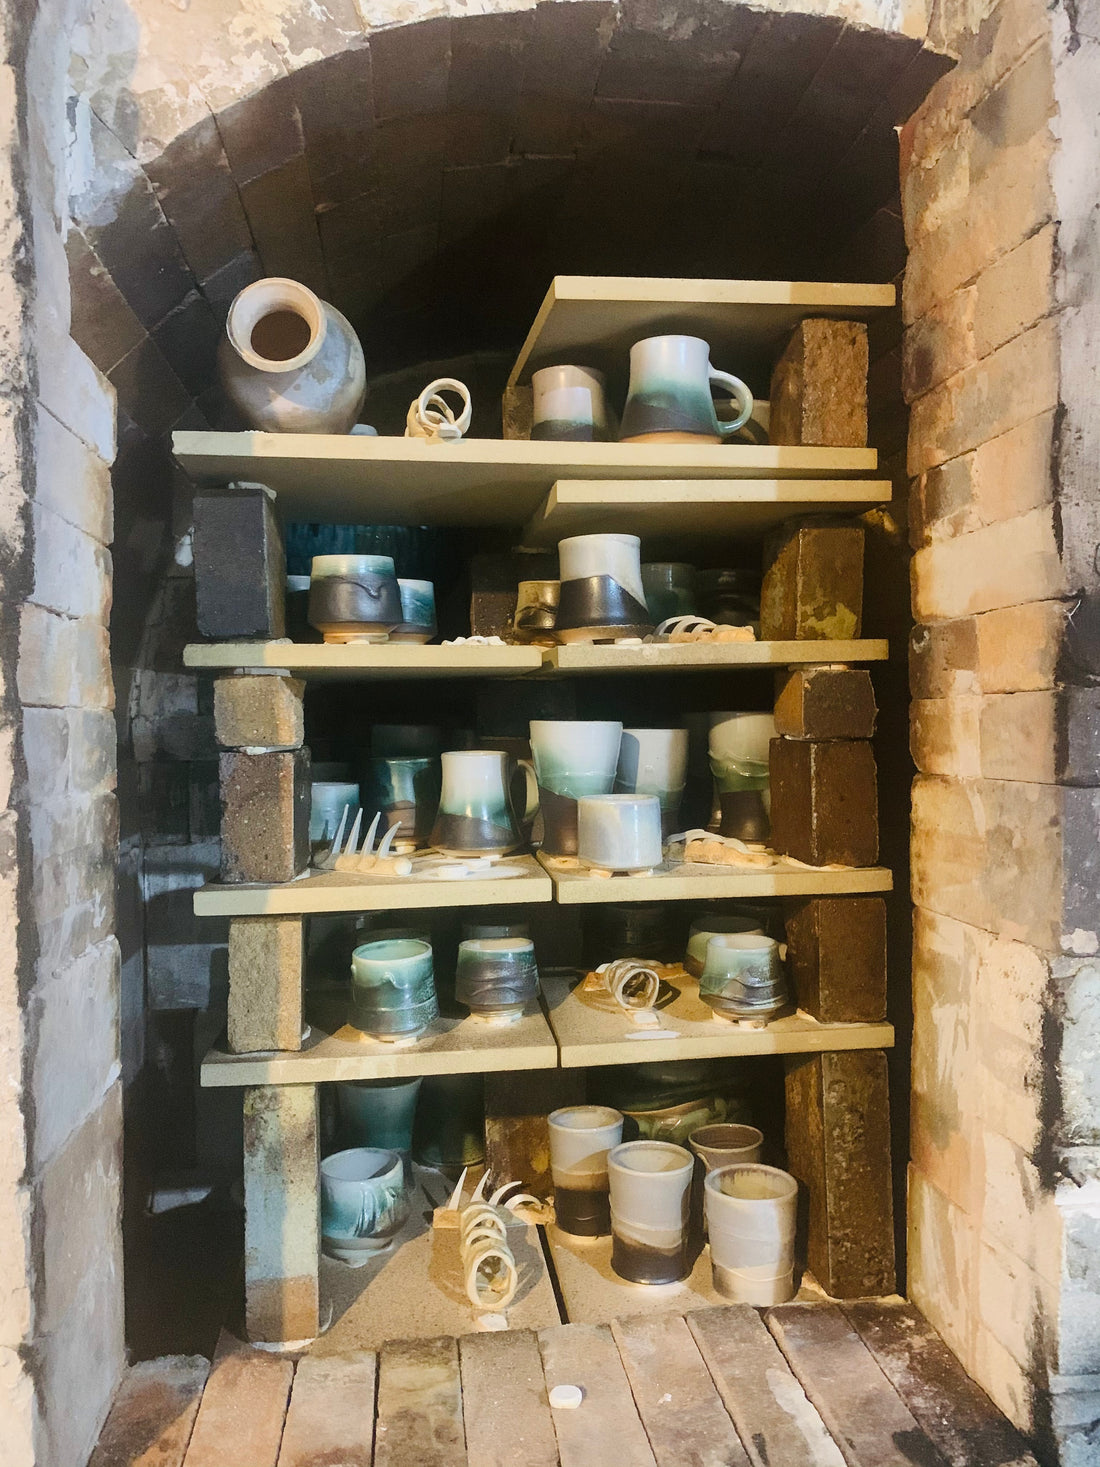 First Firing in the New Wood Kiln